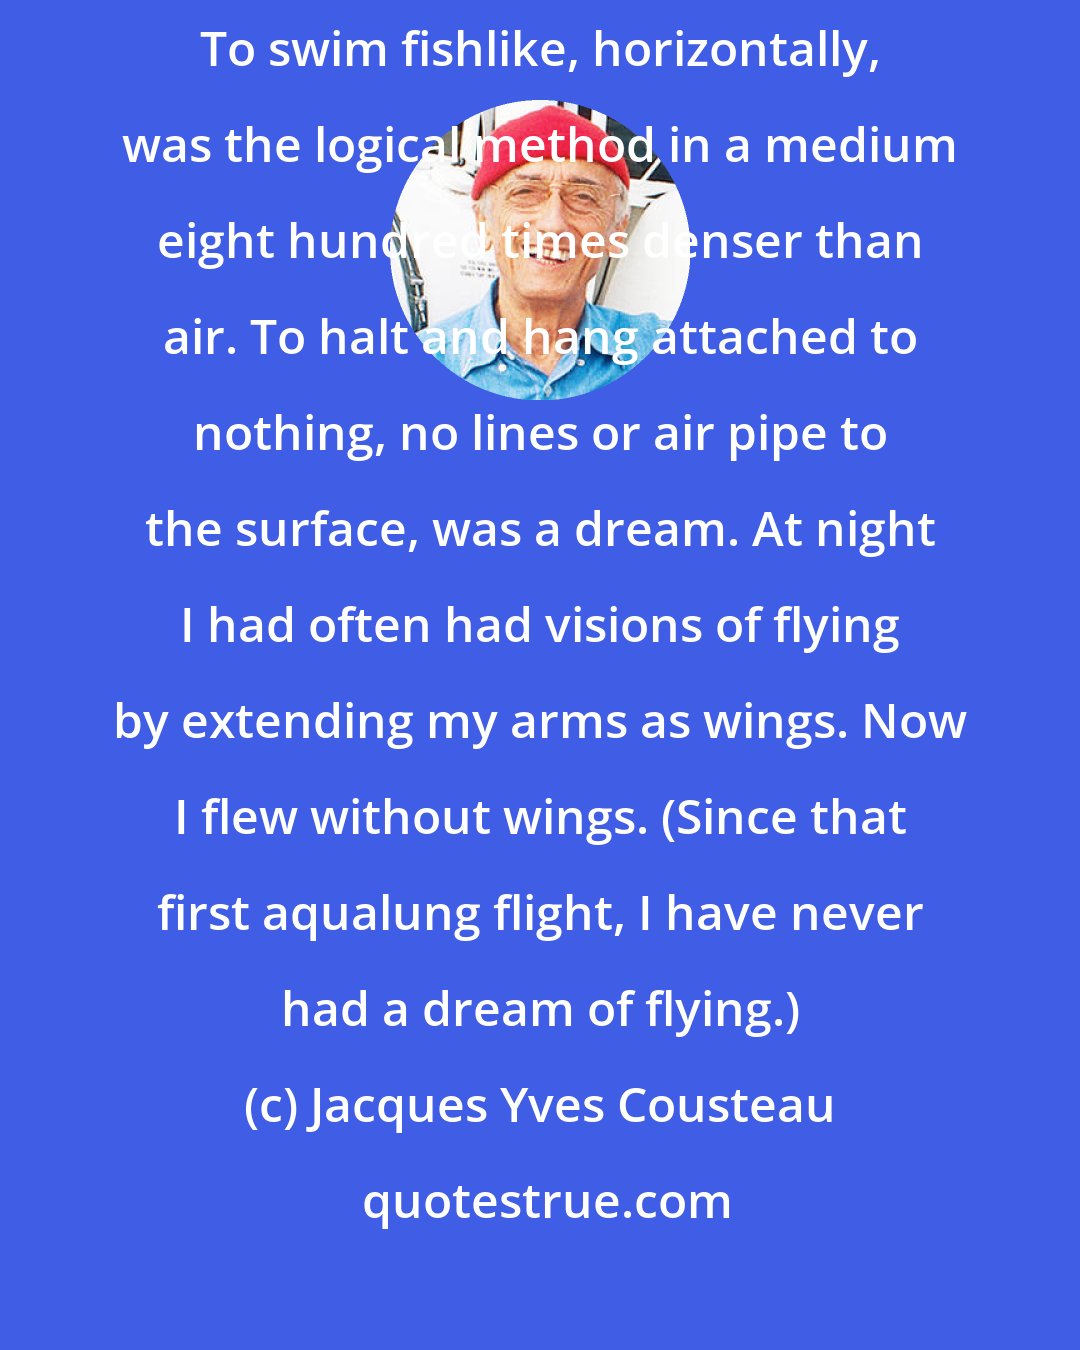 Jacques Yves Cousteau: I swam across the rocks and compared myself favorably with the sars. To swim fishlike, horizontally, was the logical method in a medium eight hundred times denser than air. To halt and hang attached to nothing, no lines or air pipe to the surface, was a dream. At night I had often had visions of flying by extending my arms as wings. Now I flew without wings. (Since that first aqualung flight, I have never had a dream of flying.)